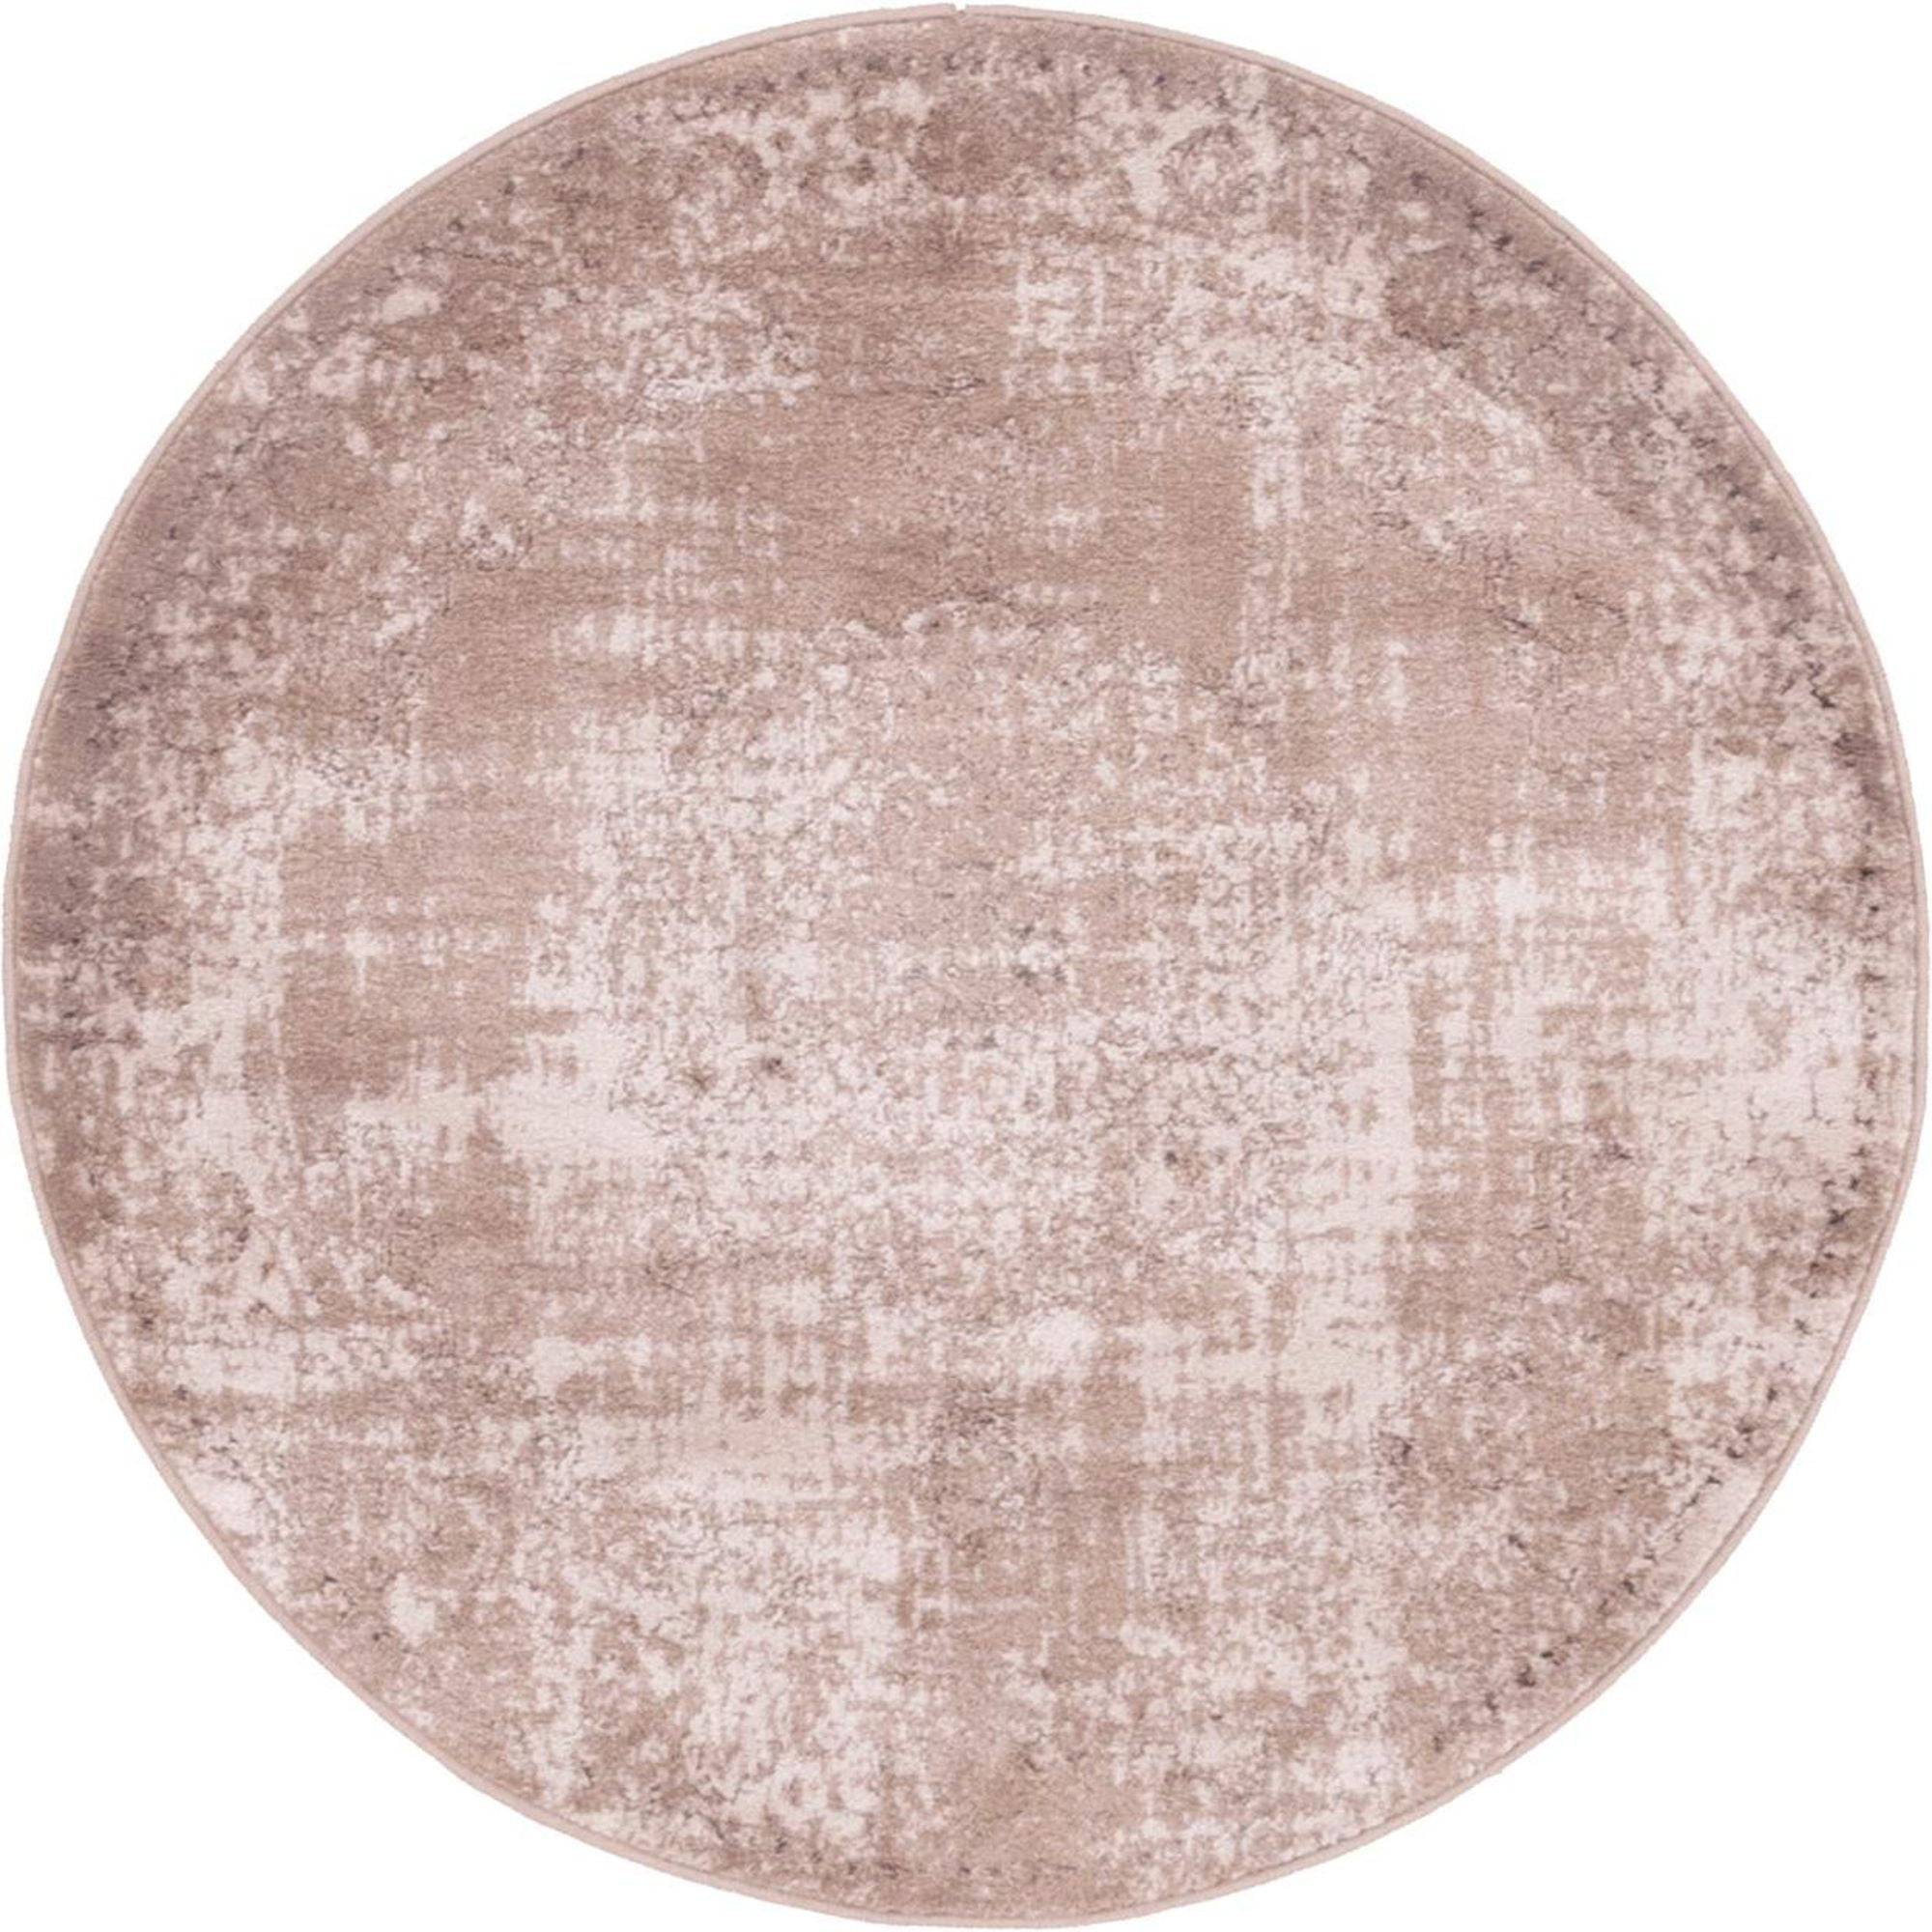 Unique Loom Leila Rug Beige/Ivory 3' 3" Round Perfect For Dining Room Entryway Bed Room Kids Room -New in Box